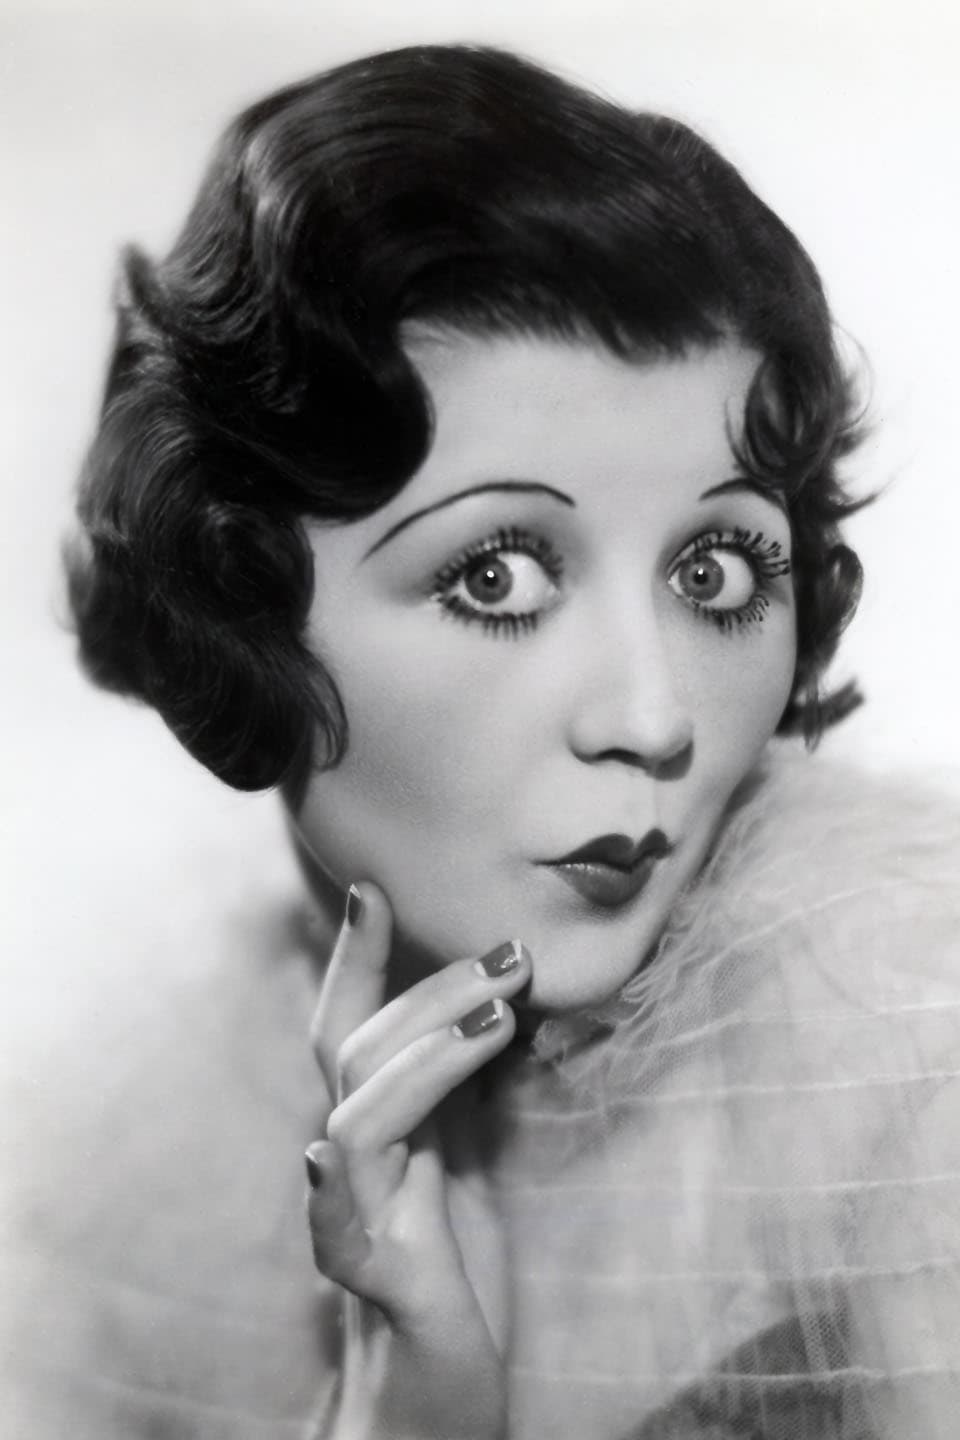 Mae Questel | Voice of Helen Kane (uncredited)